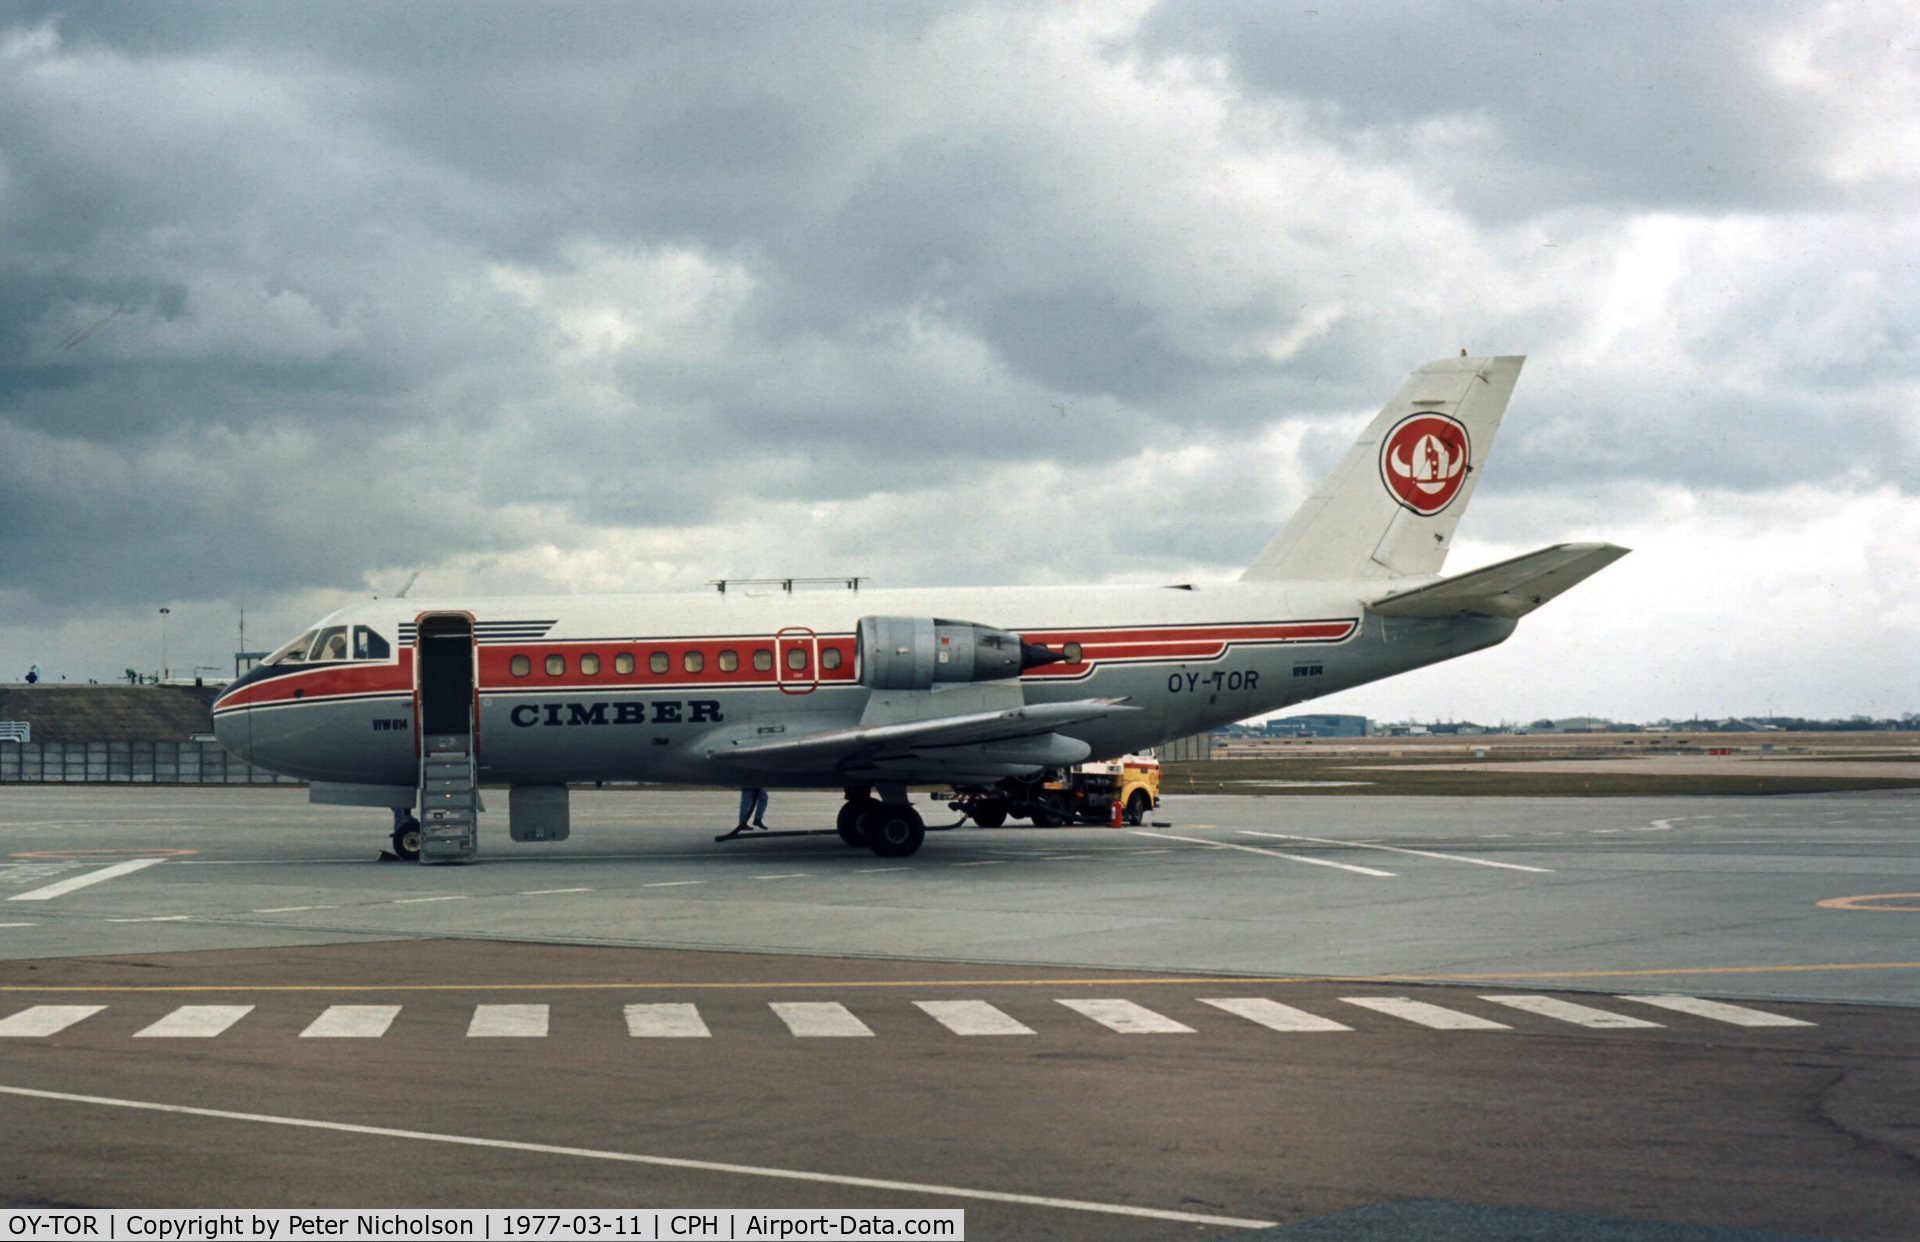 OY-TOR, 1975 VFW-Fokker VFW-614 C/N G04, Cimber Air of Denmark was the launch customer for this aircraft and is seen at Copenhagen Kastrup in the Spring of 1977.